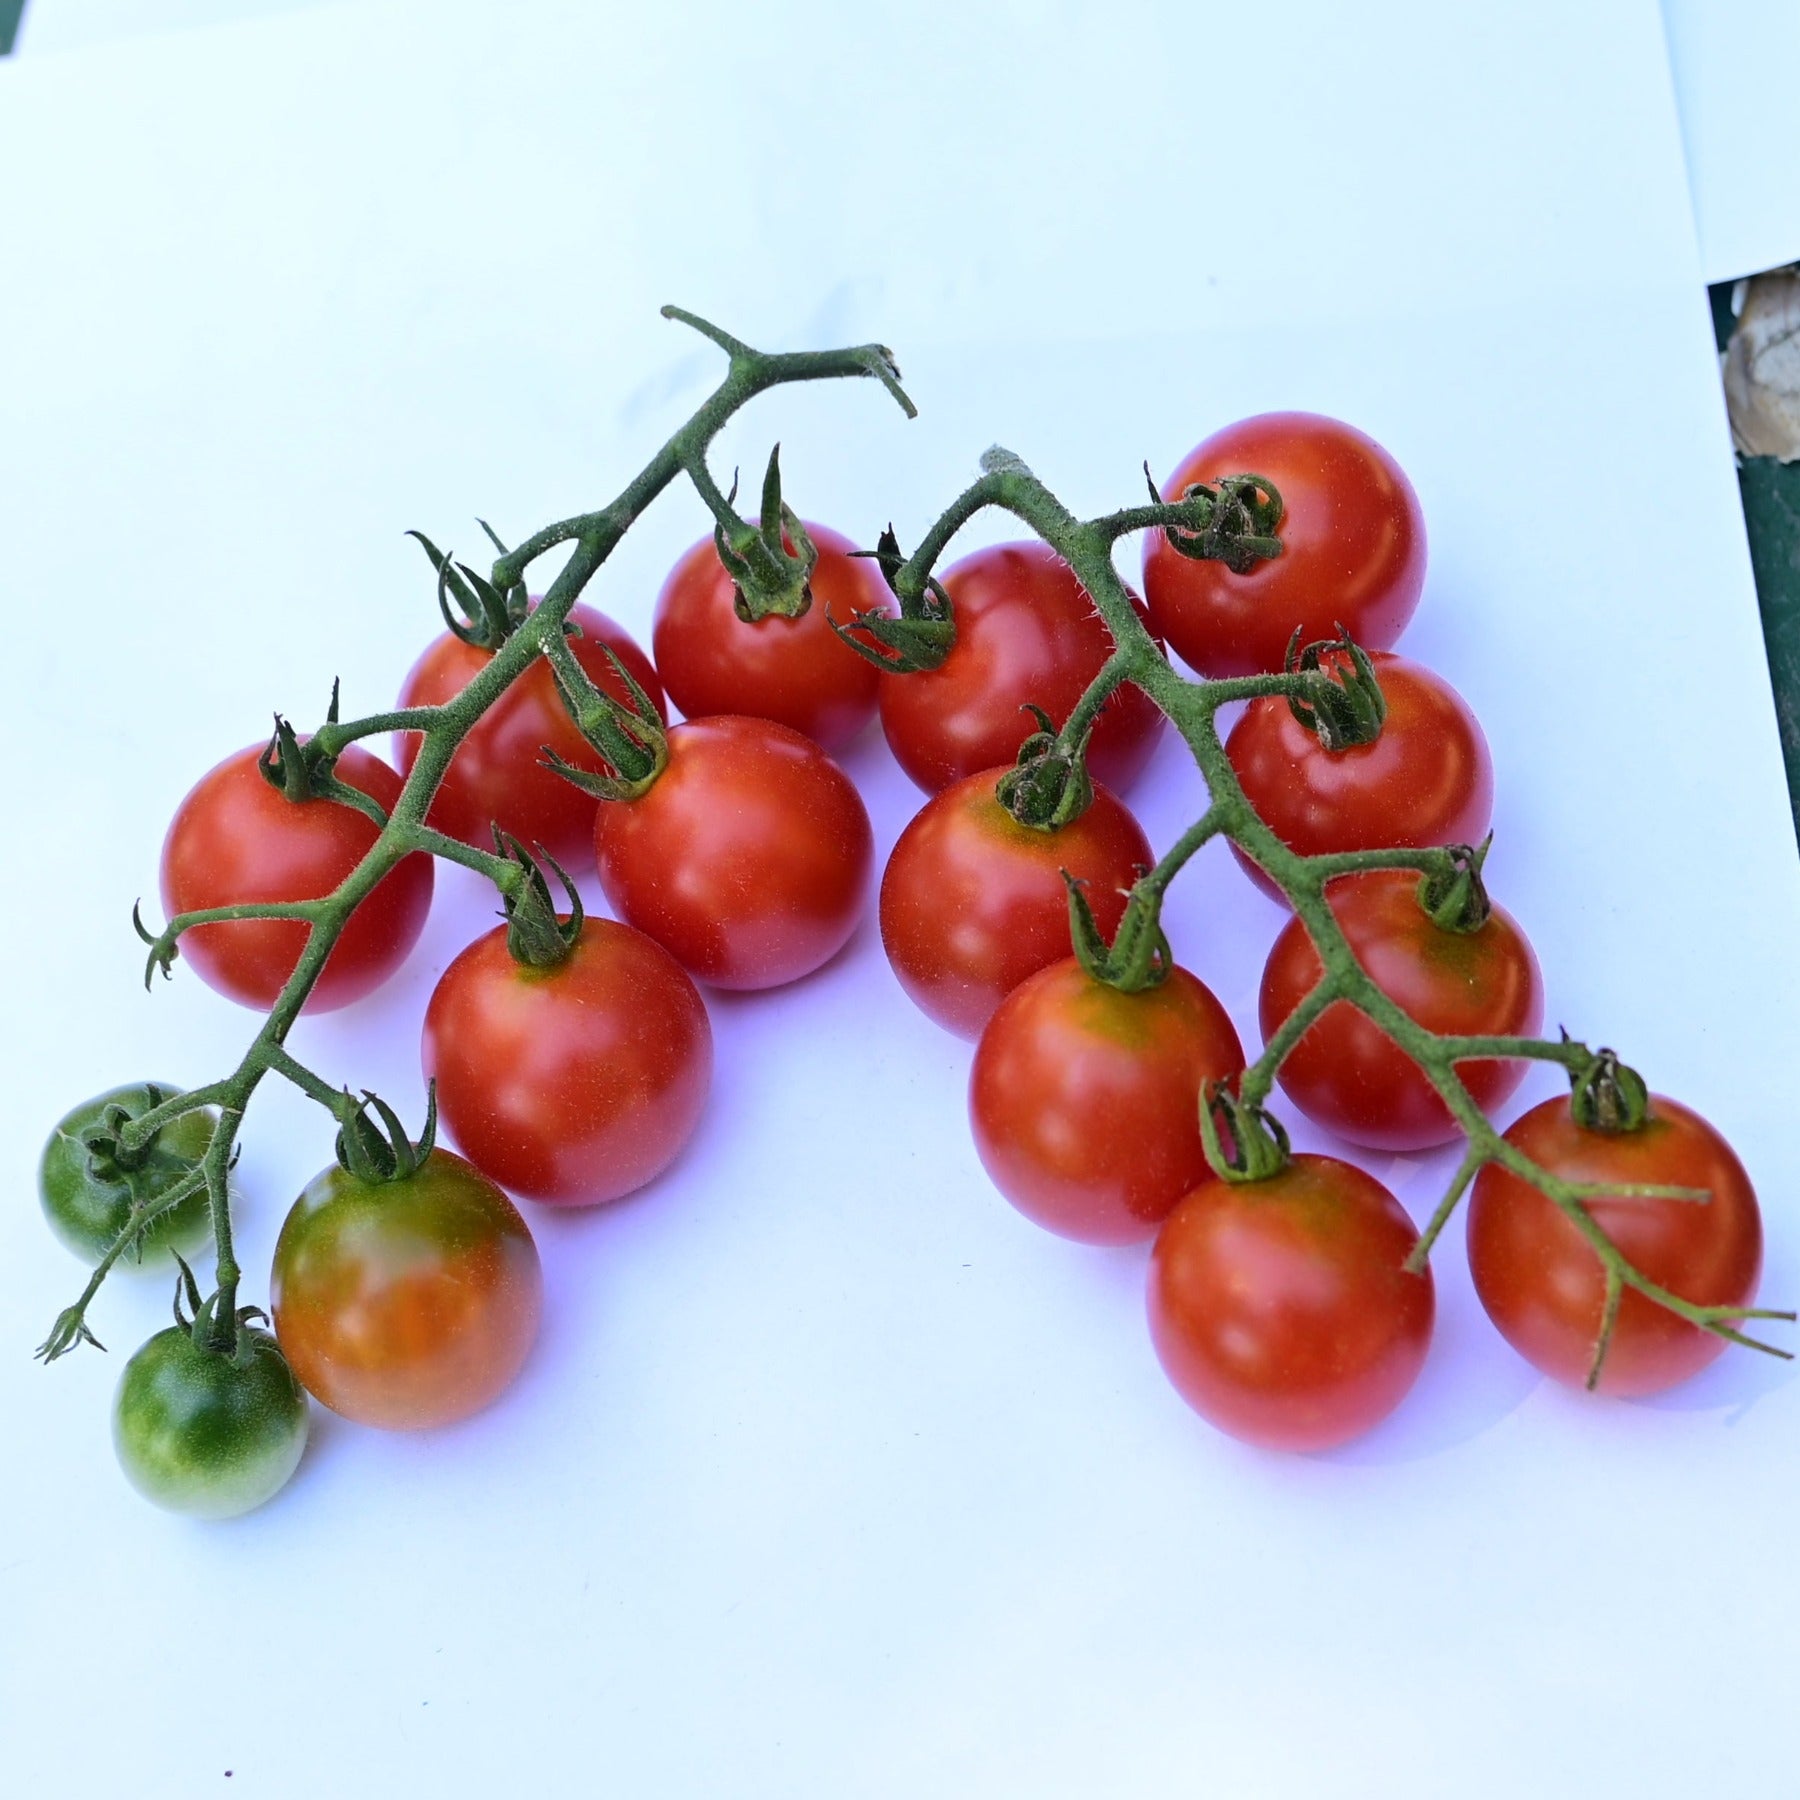 Two trusses of be-my-baby cherry tomatoes against a white background